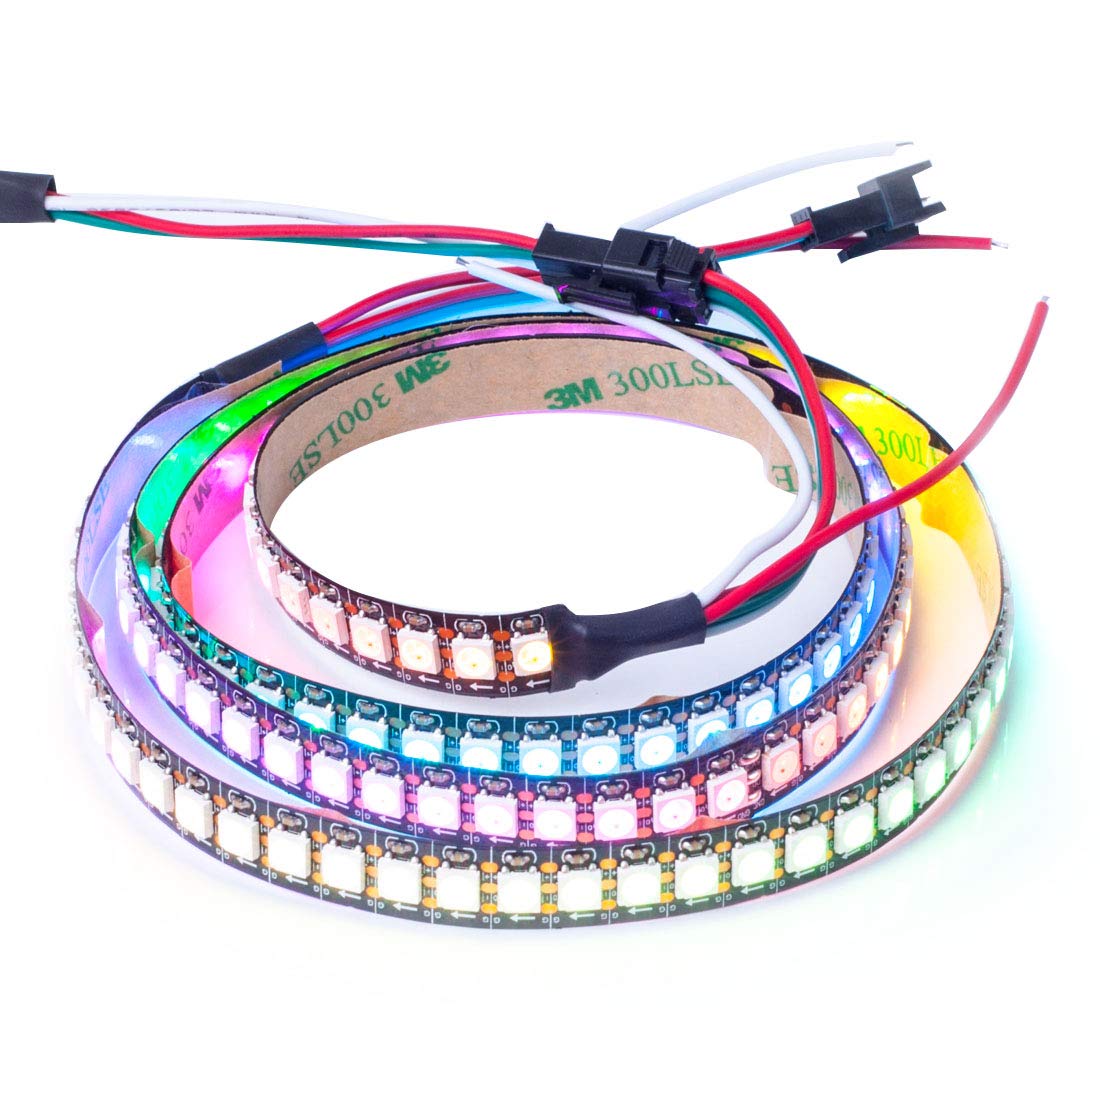 BTF-LIGHTING WS2812E ECO RGB Alloy Wires 5050SMD Individual Addressable 3.3FT 144(2X72) Pixels/m Flexible Black PCB Full Color Pixel Strip Dream Color IP30 Non-Waterproof DIY Only DC5V(Only Strip)